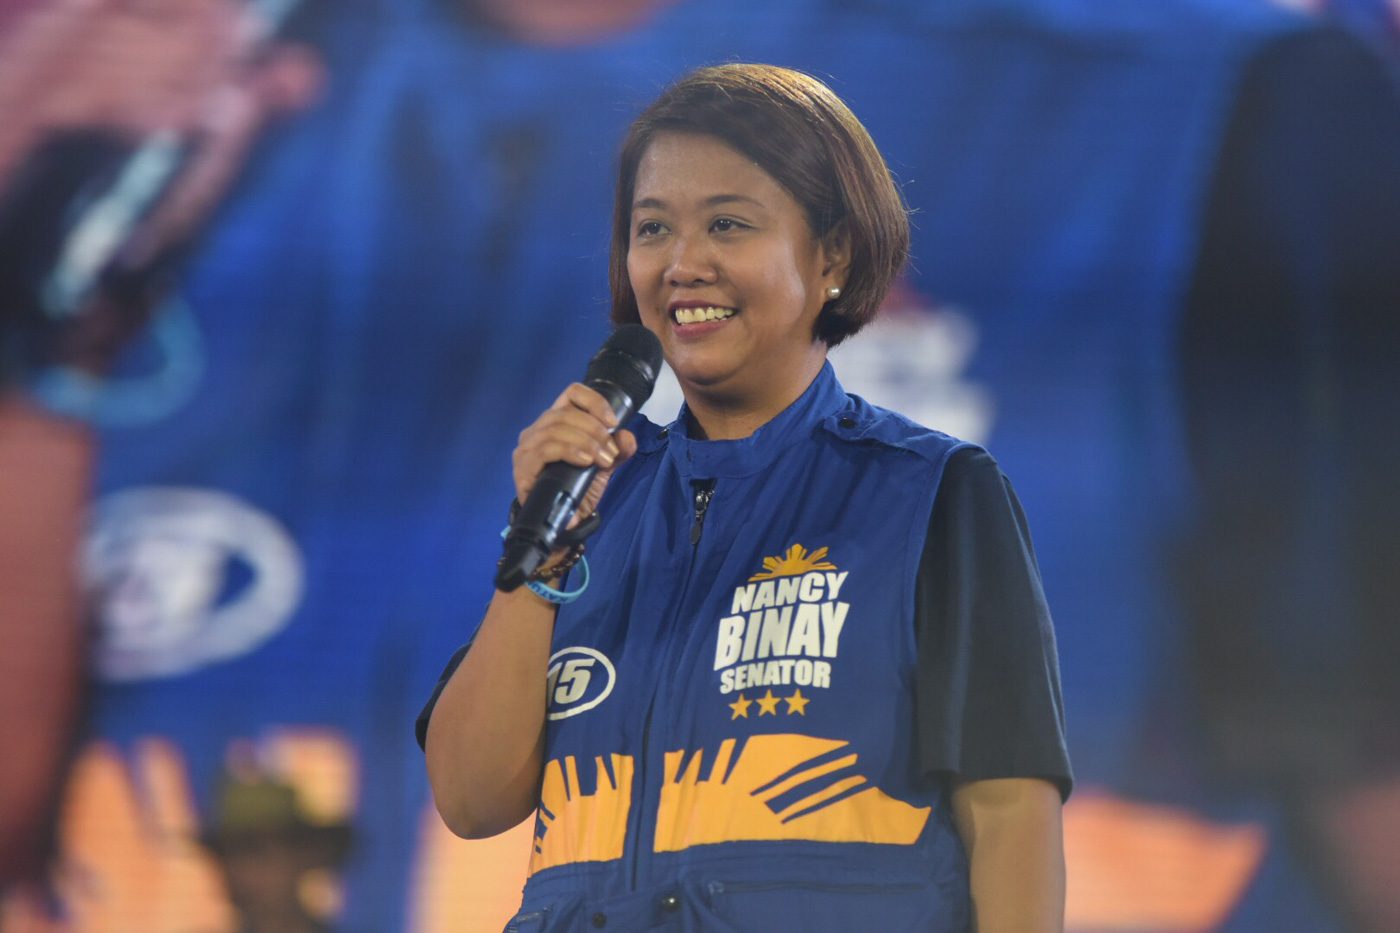 Nancy Binay claims victory over JV Ejercito in 2019 polls